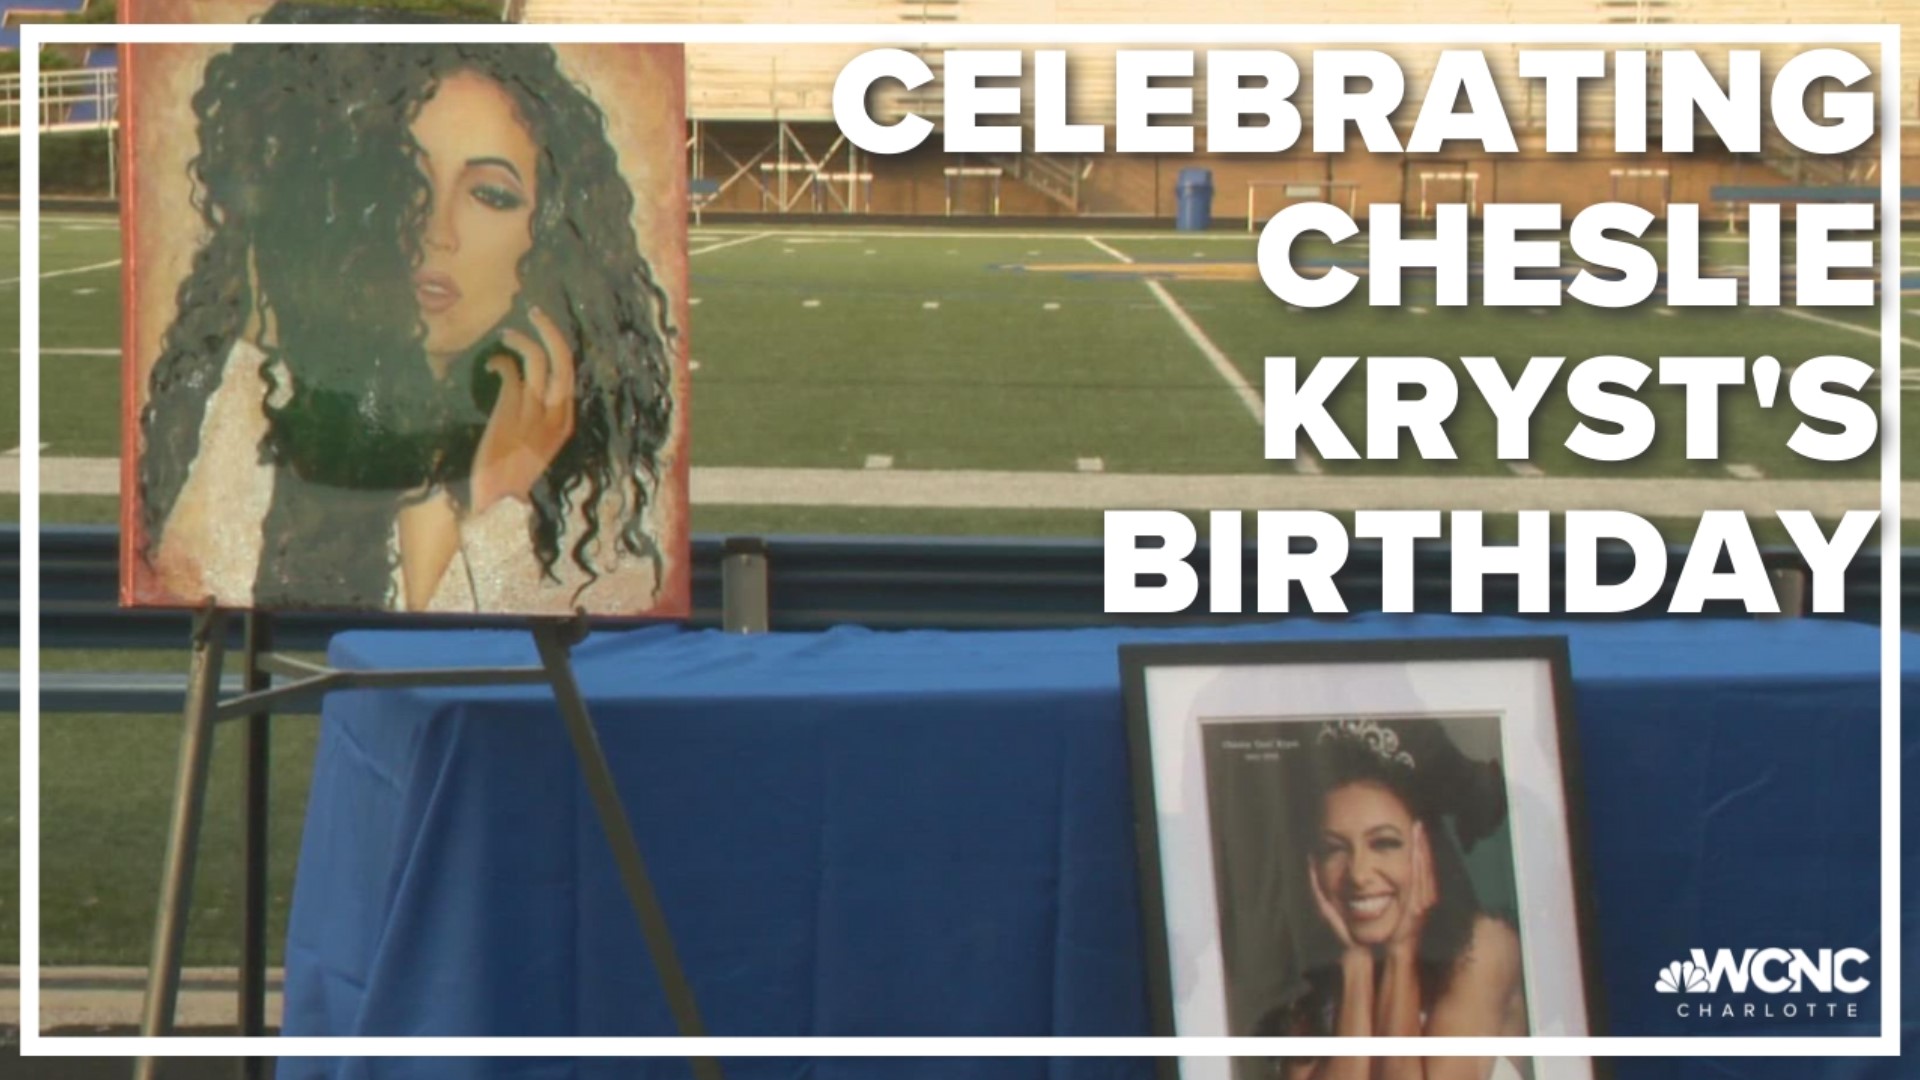 The family of the Cheslie Kryst celebrated her with a public vigil and balloon release Thursday in honor of what would have been her 31st birthday.